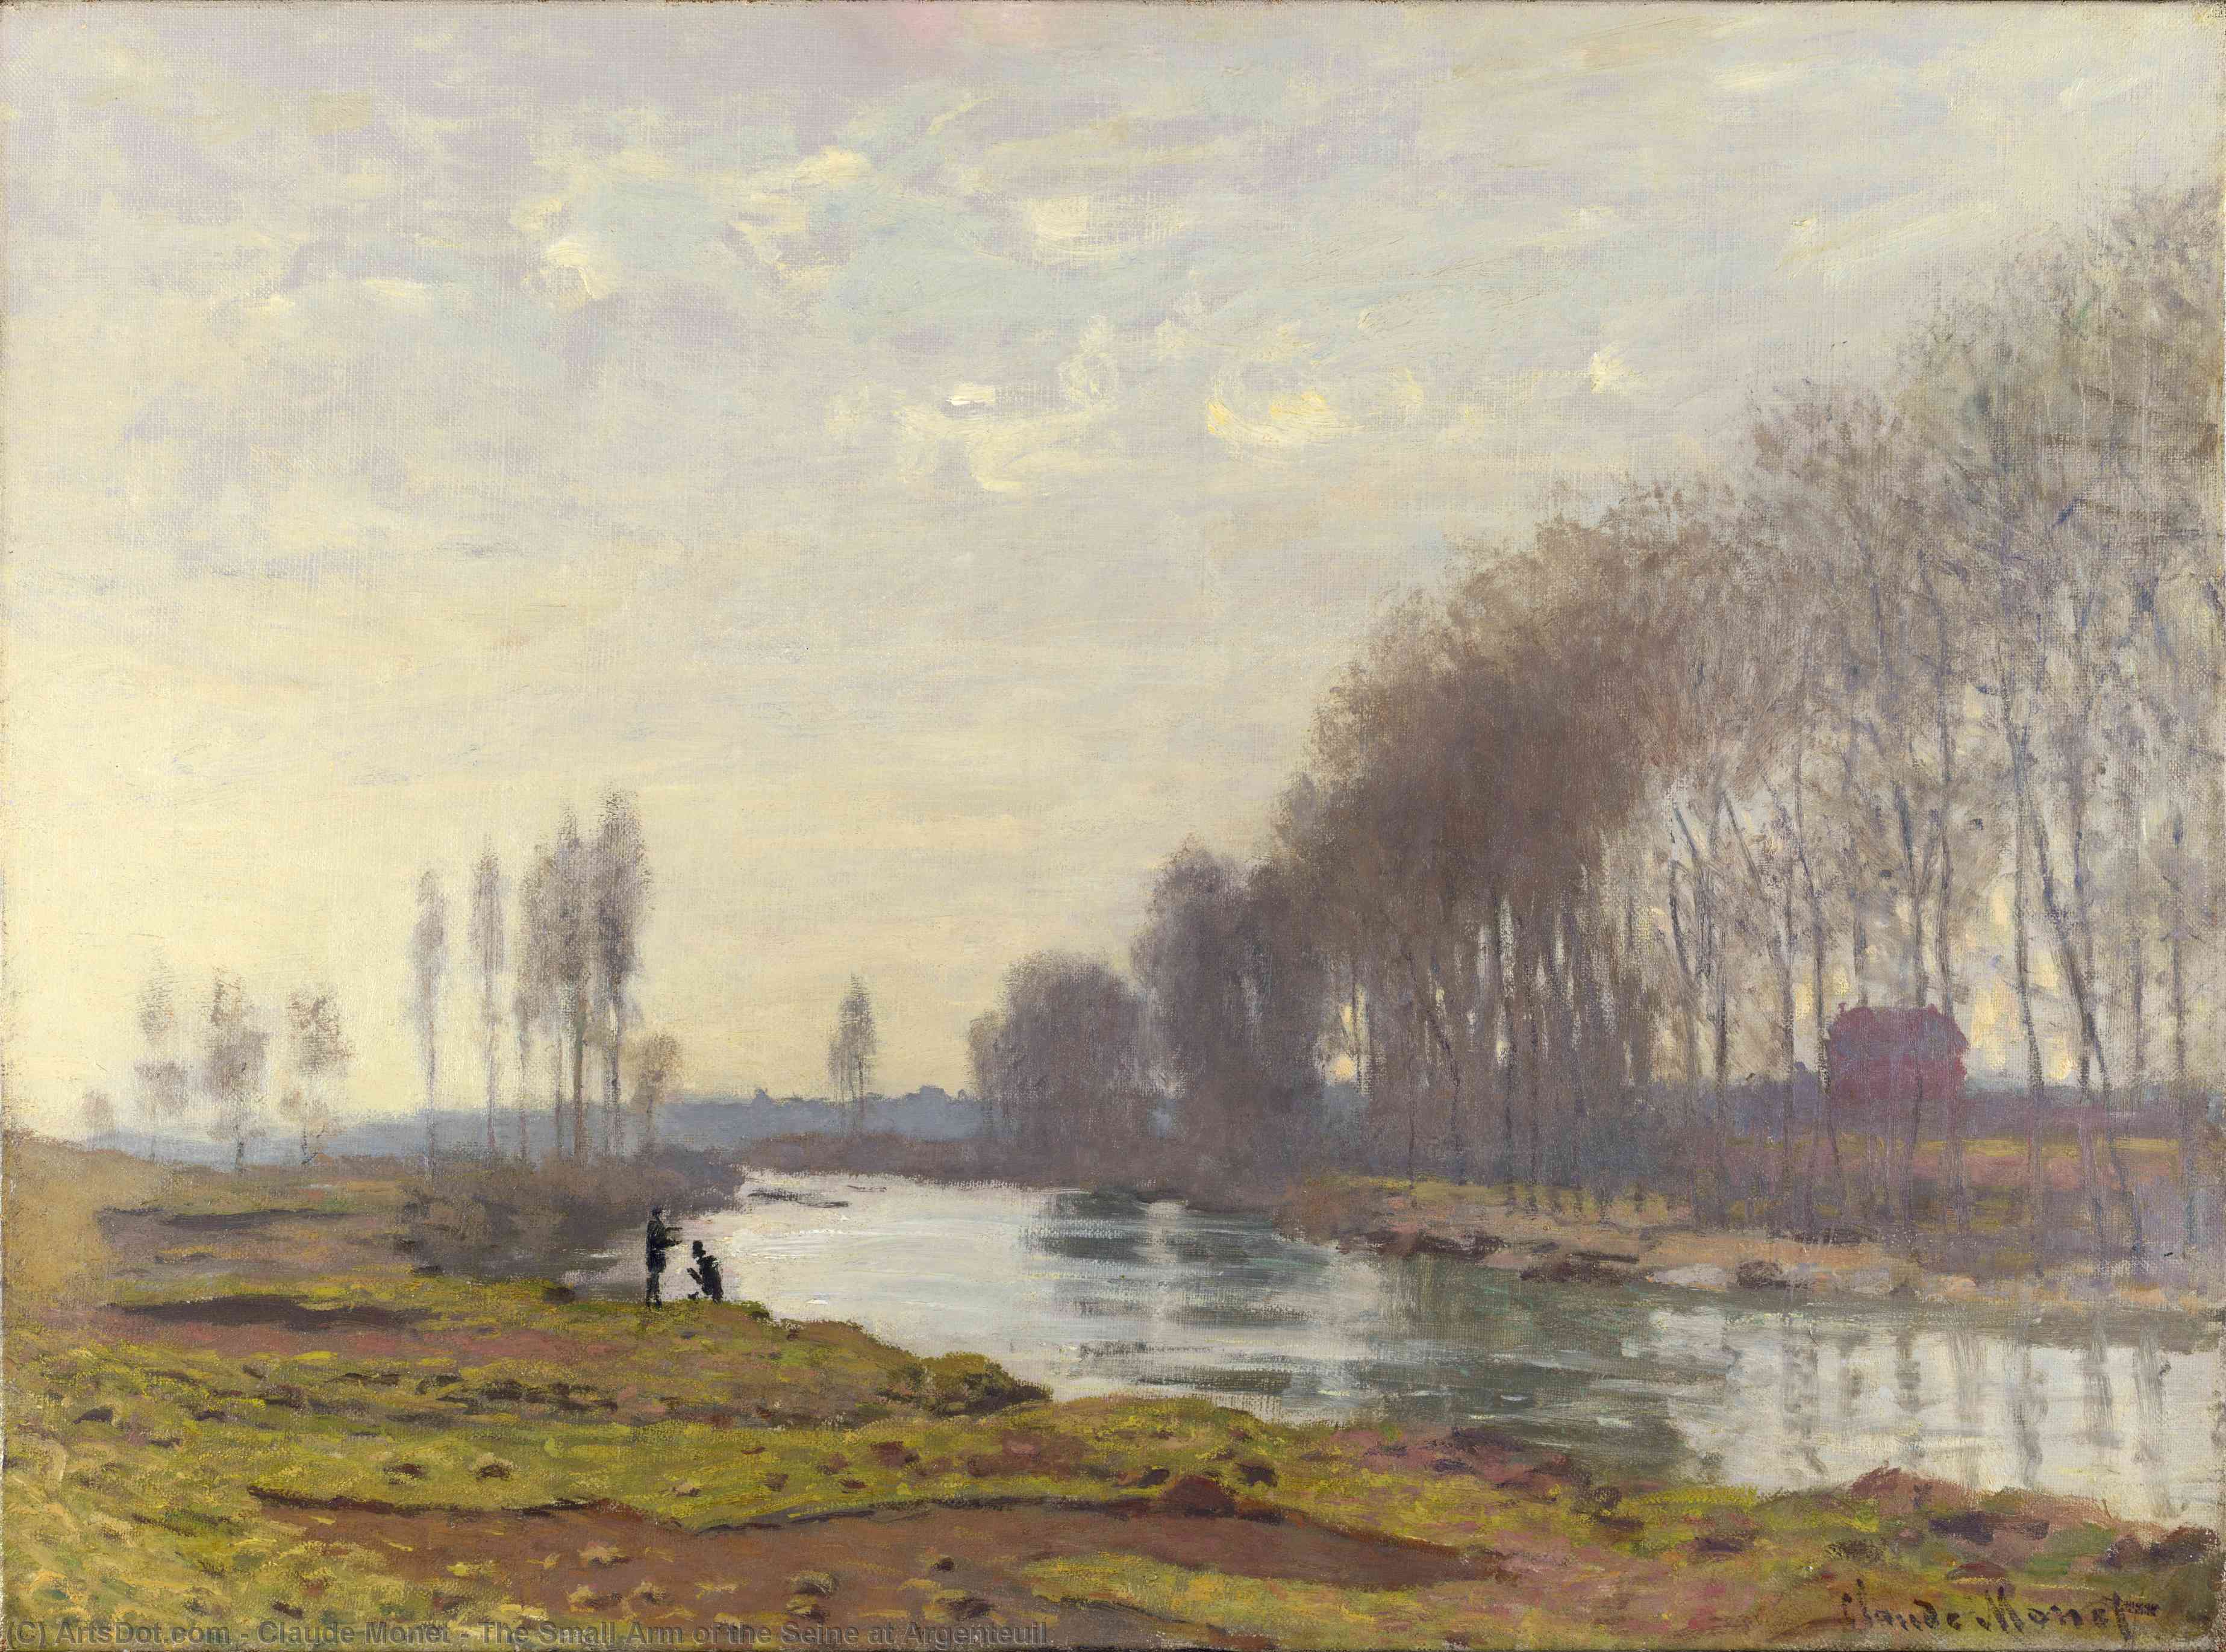 WikiOO.org - Encyclopedia of Fine Arts - Maleri, Artwork Claude Monet - The Small Arm of the Seine at Argenteuil